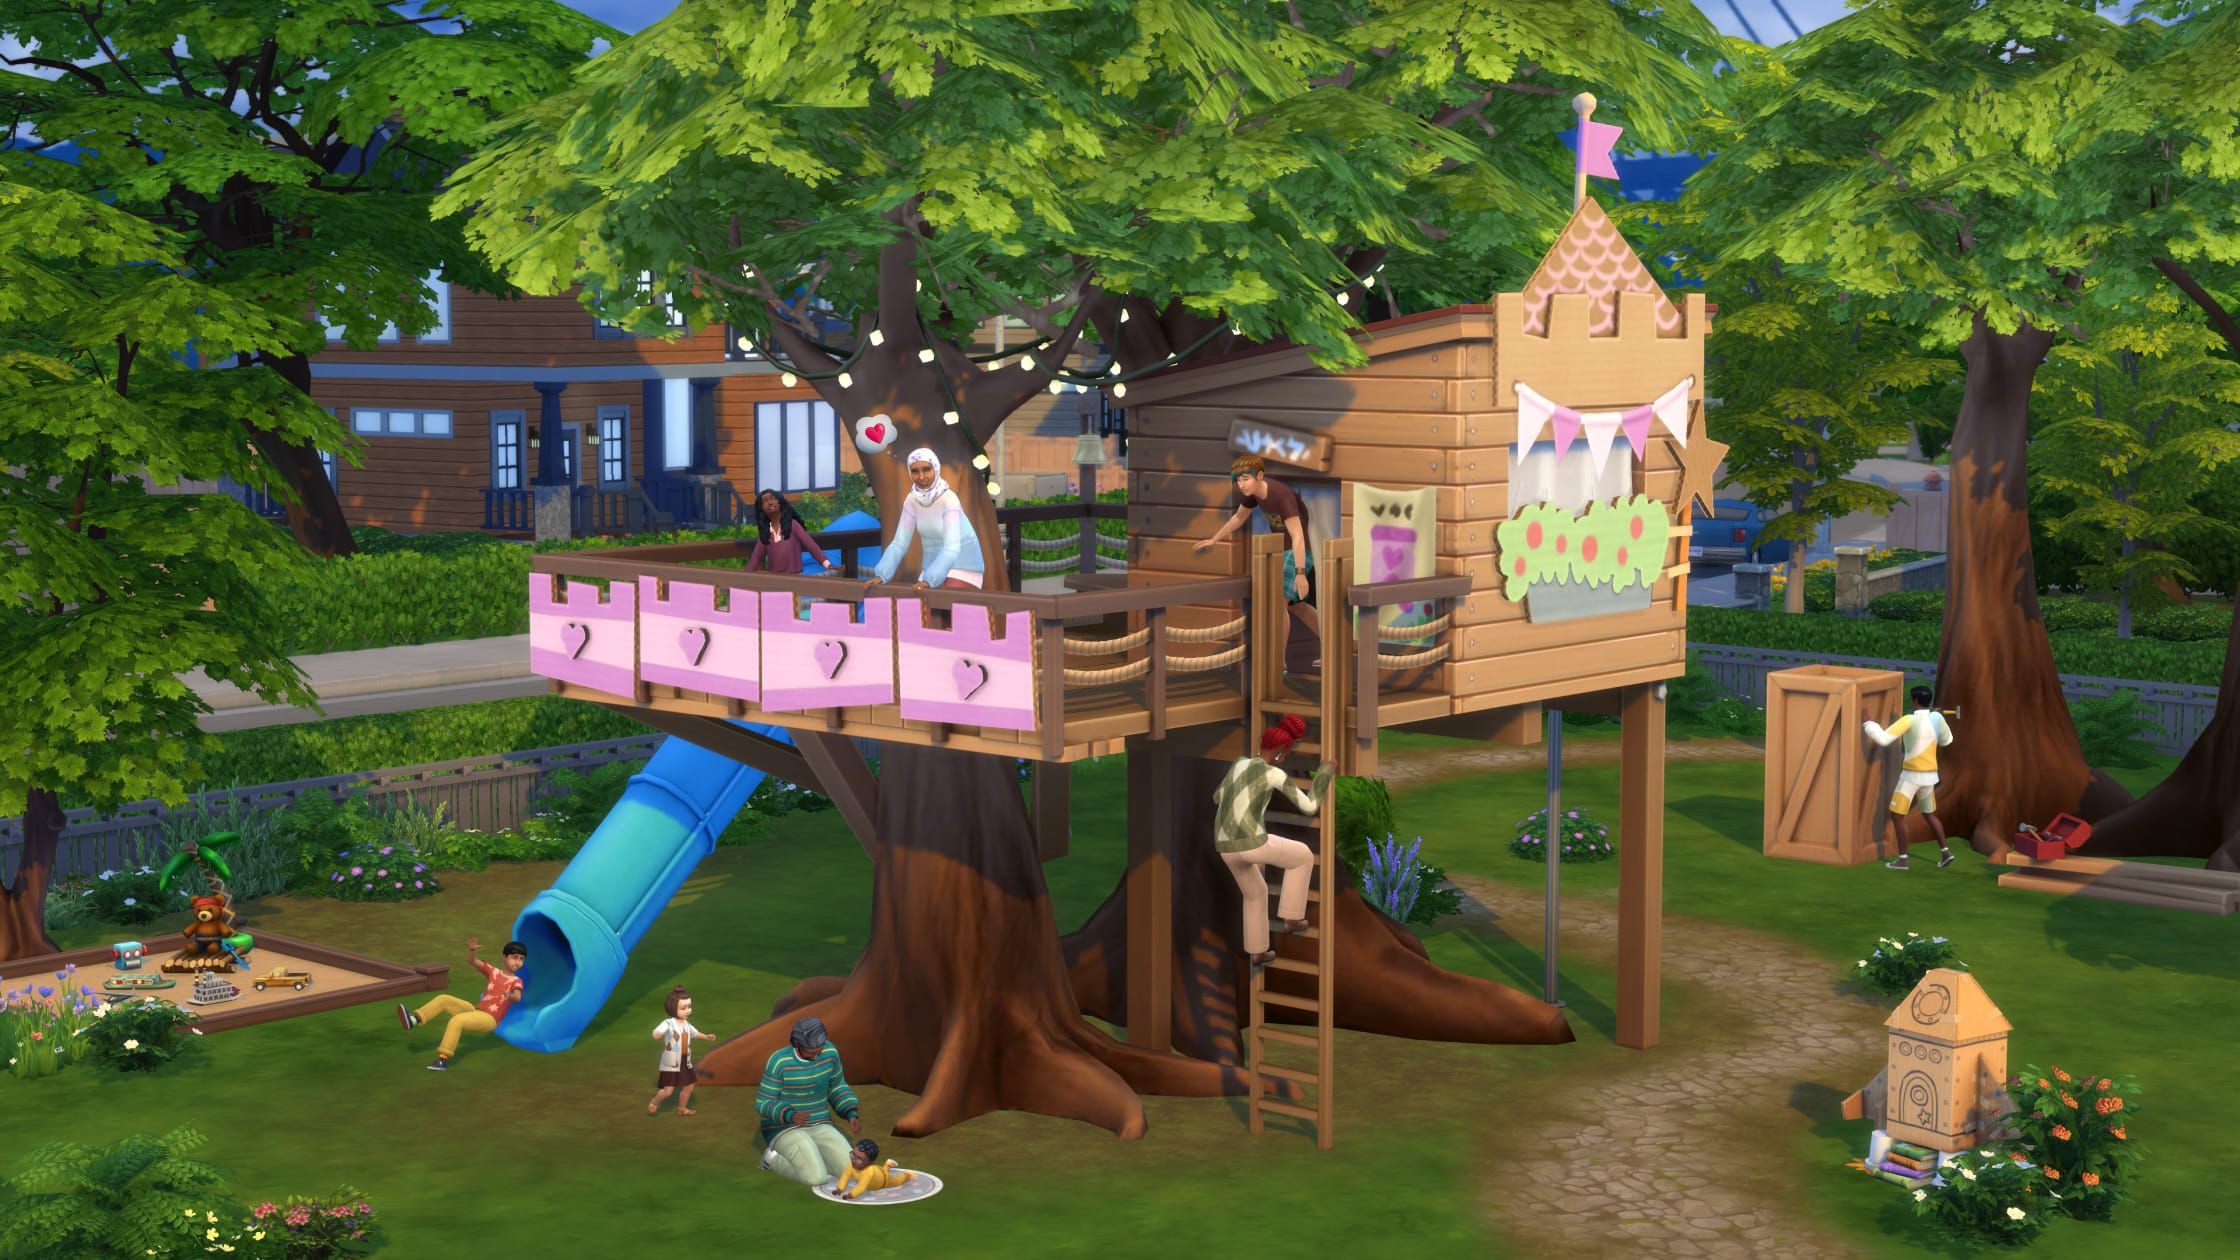 Sims 4's treehouse is covered with banners and one child is standing on a ledge while another is climbing it.